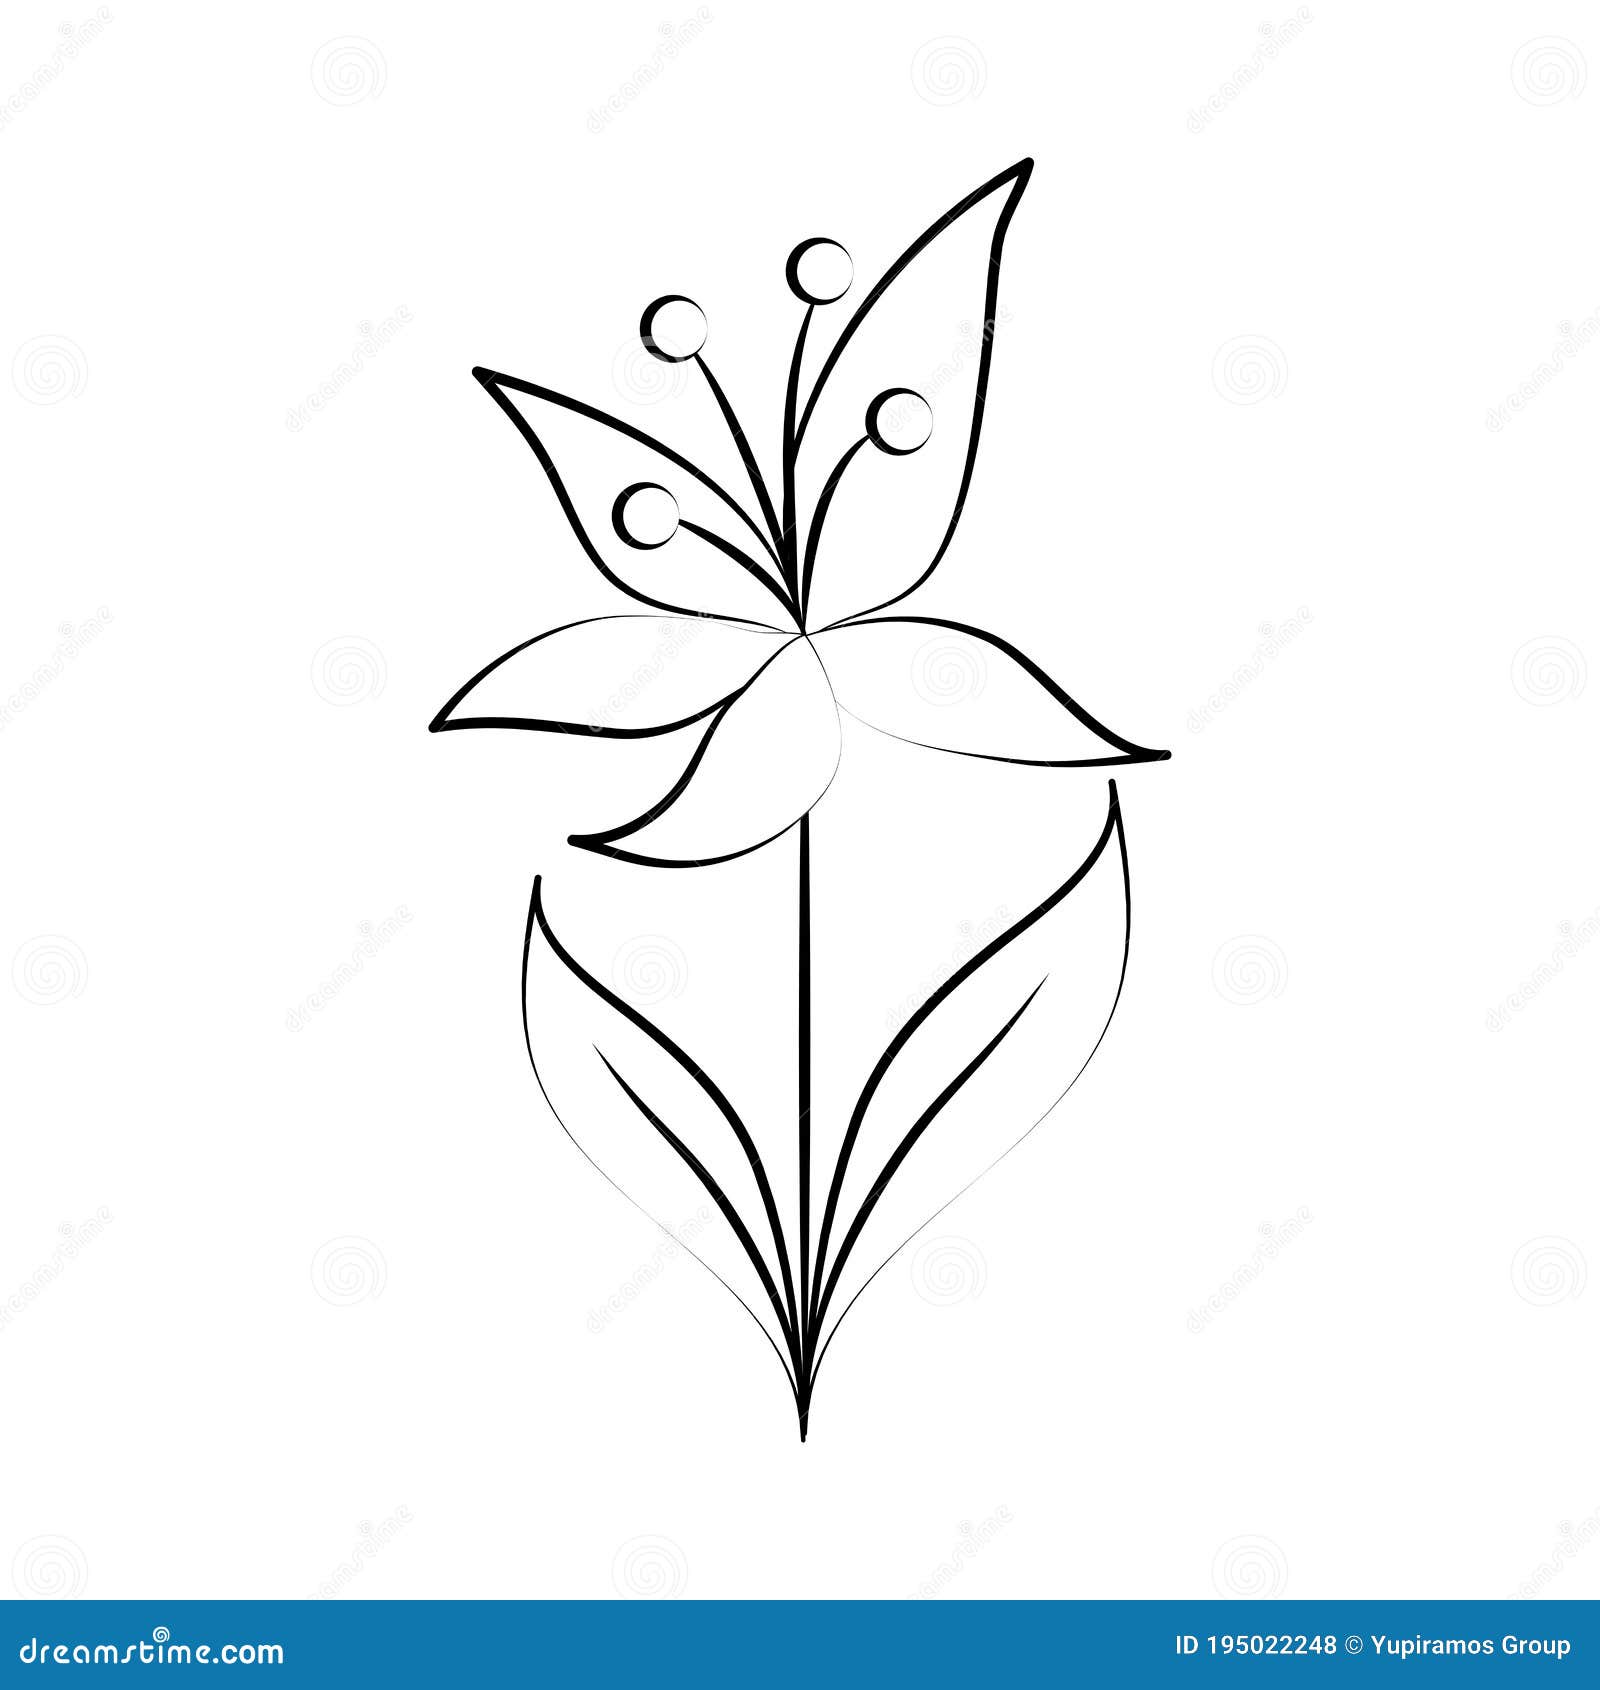 Set Of Tattoo In Minimalism Thin Line Shapes Collection Of Space And Nature  Symbols Stock Illustration  Download Image Now  iStock